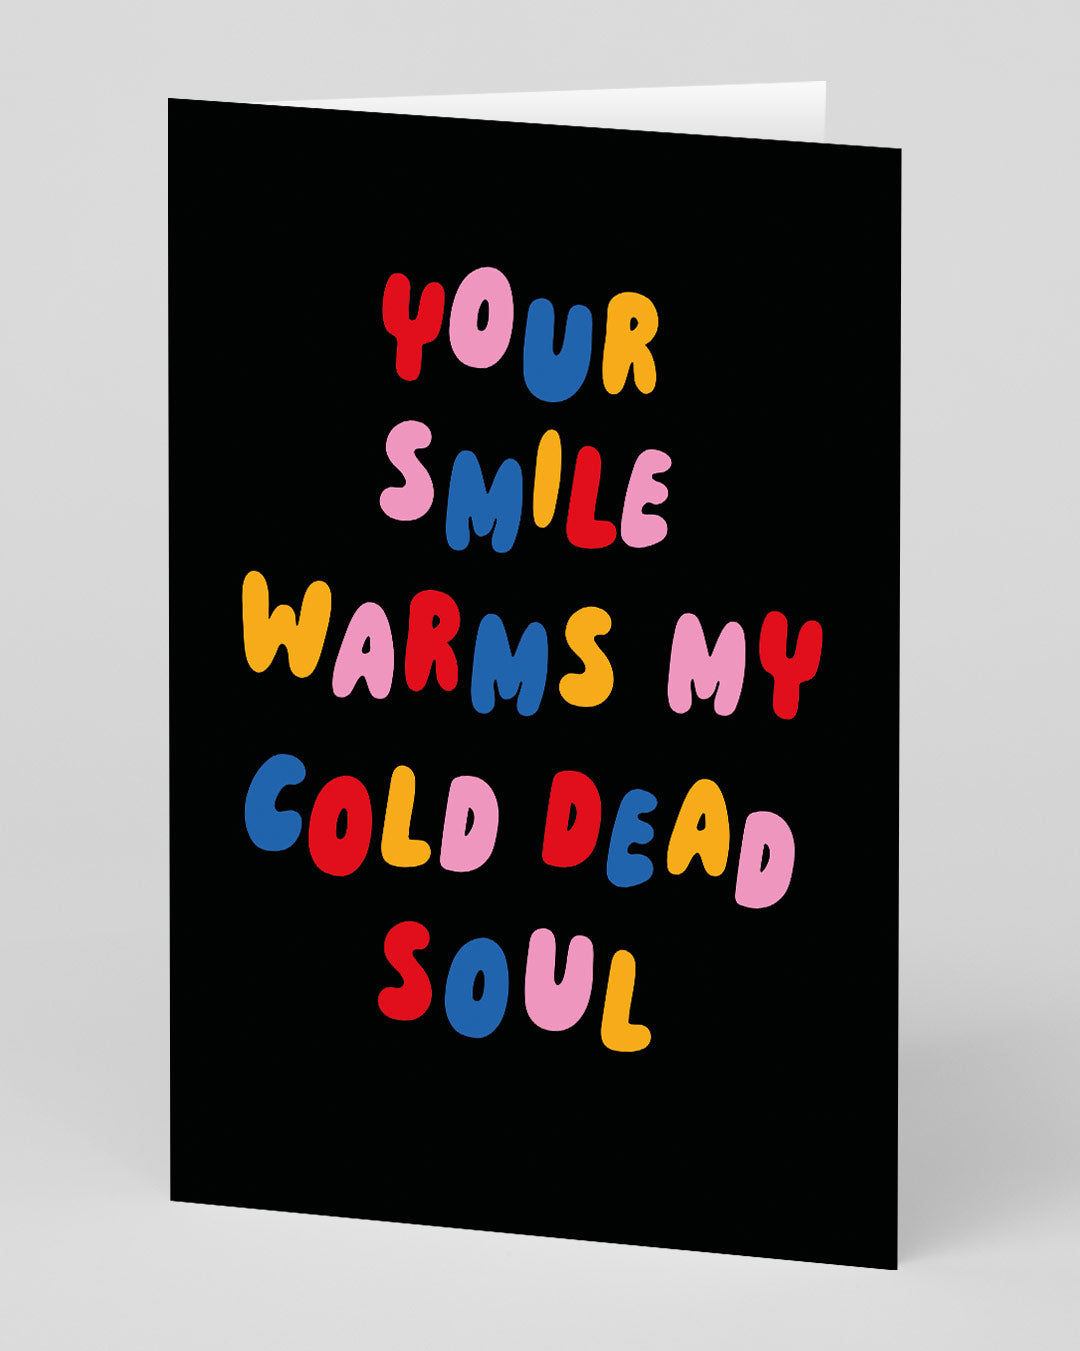 Valentine’s Day | Funny Valentines Card For Him or Her | Personalised Your Smile My Dead Soul Greeting Card | Ohh Deer Unique Valentine’s Card | Made In The UK, Eco-Friendly Materials, Plastic Free Packaging